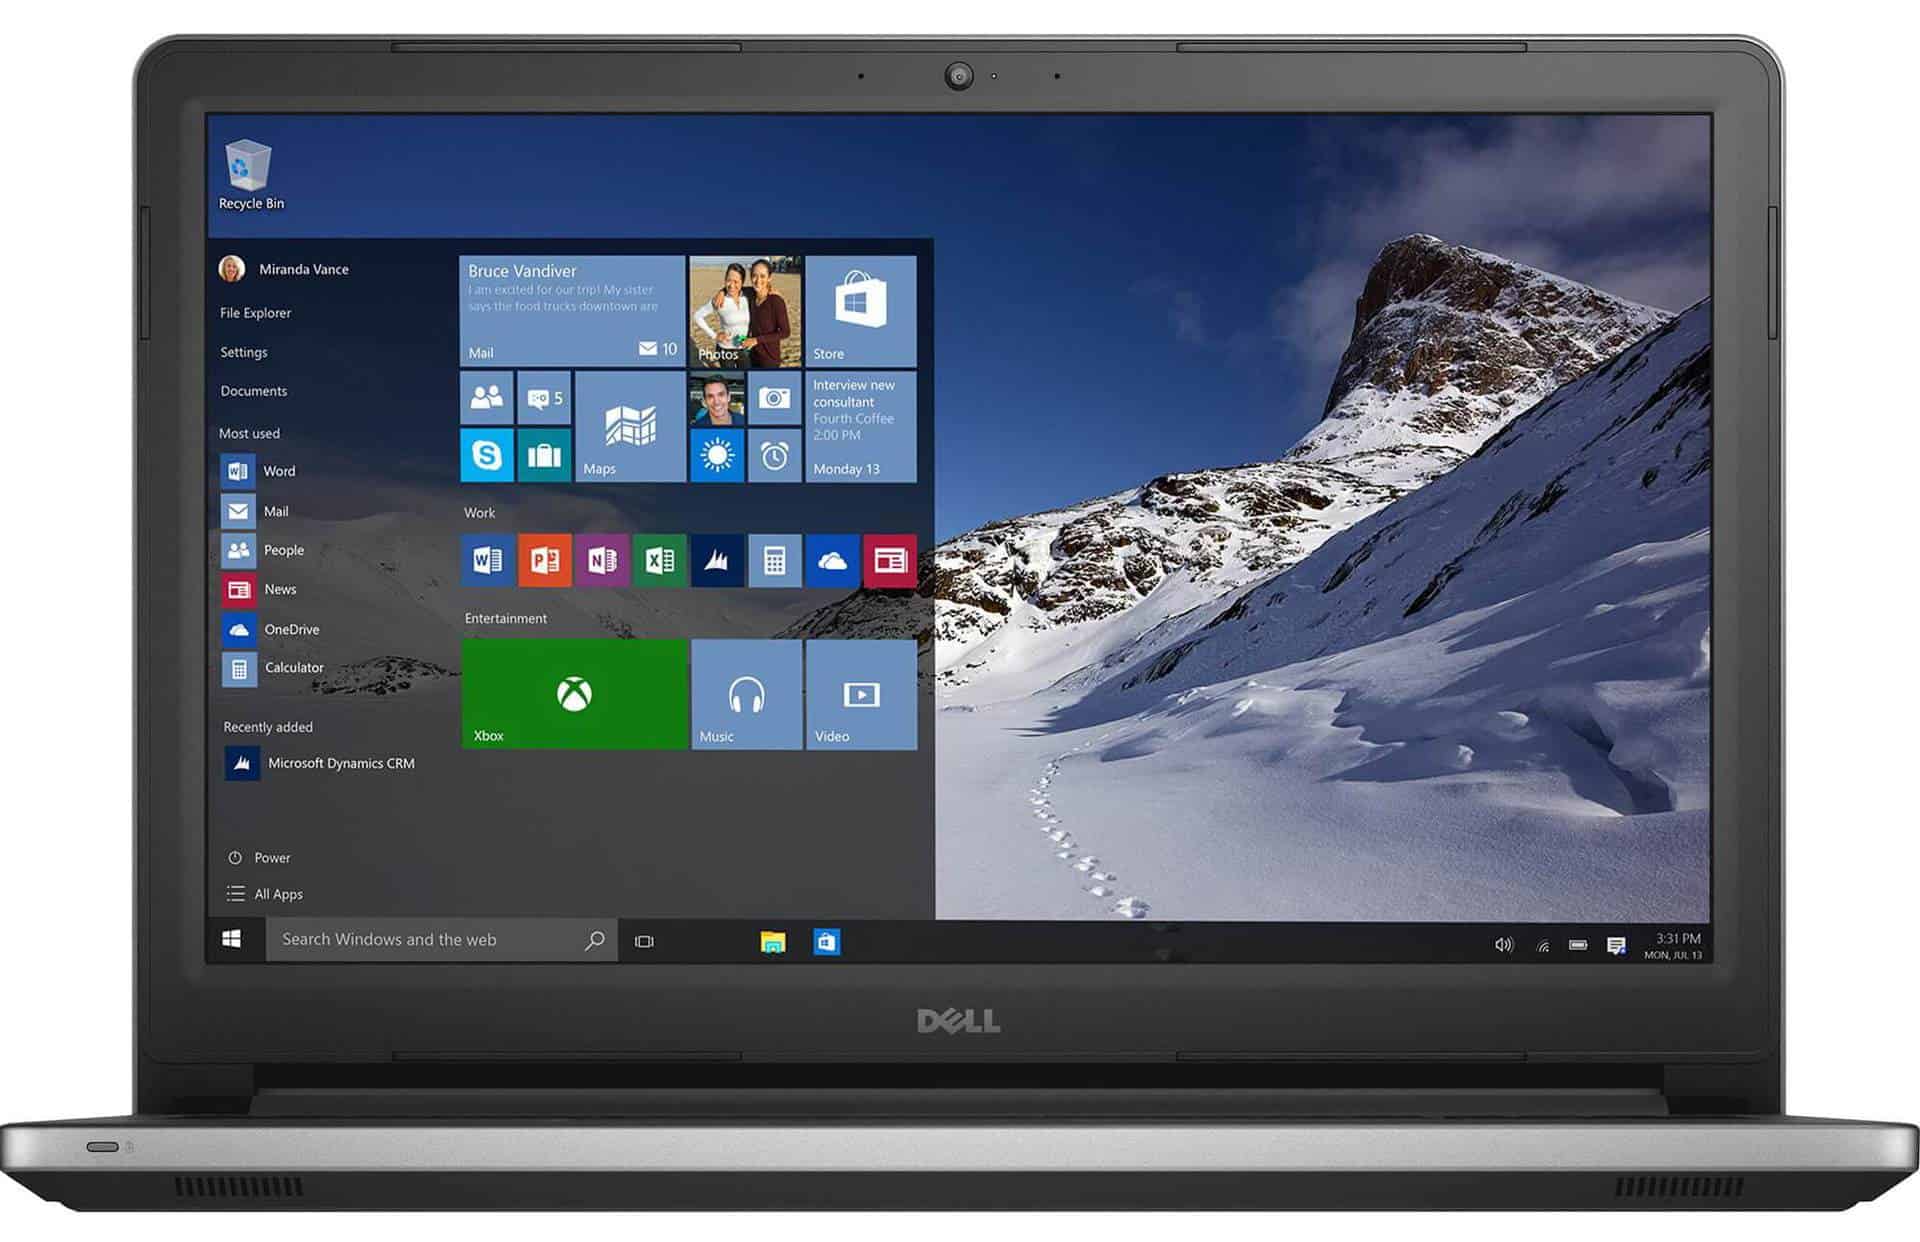 Dell Inspiron 15 5000 Series (Model 5559 Tulip) (Touch or Non-Touch) 15-inch notebook computer with Intel SKL Skylake processor